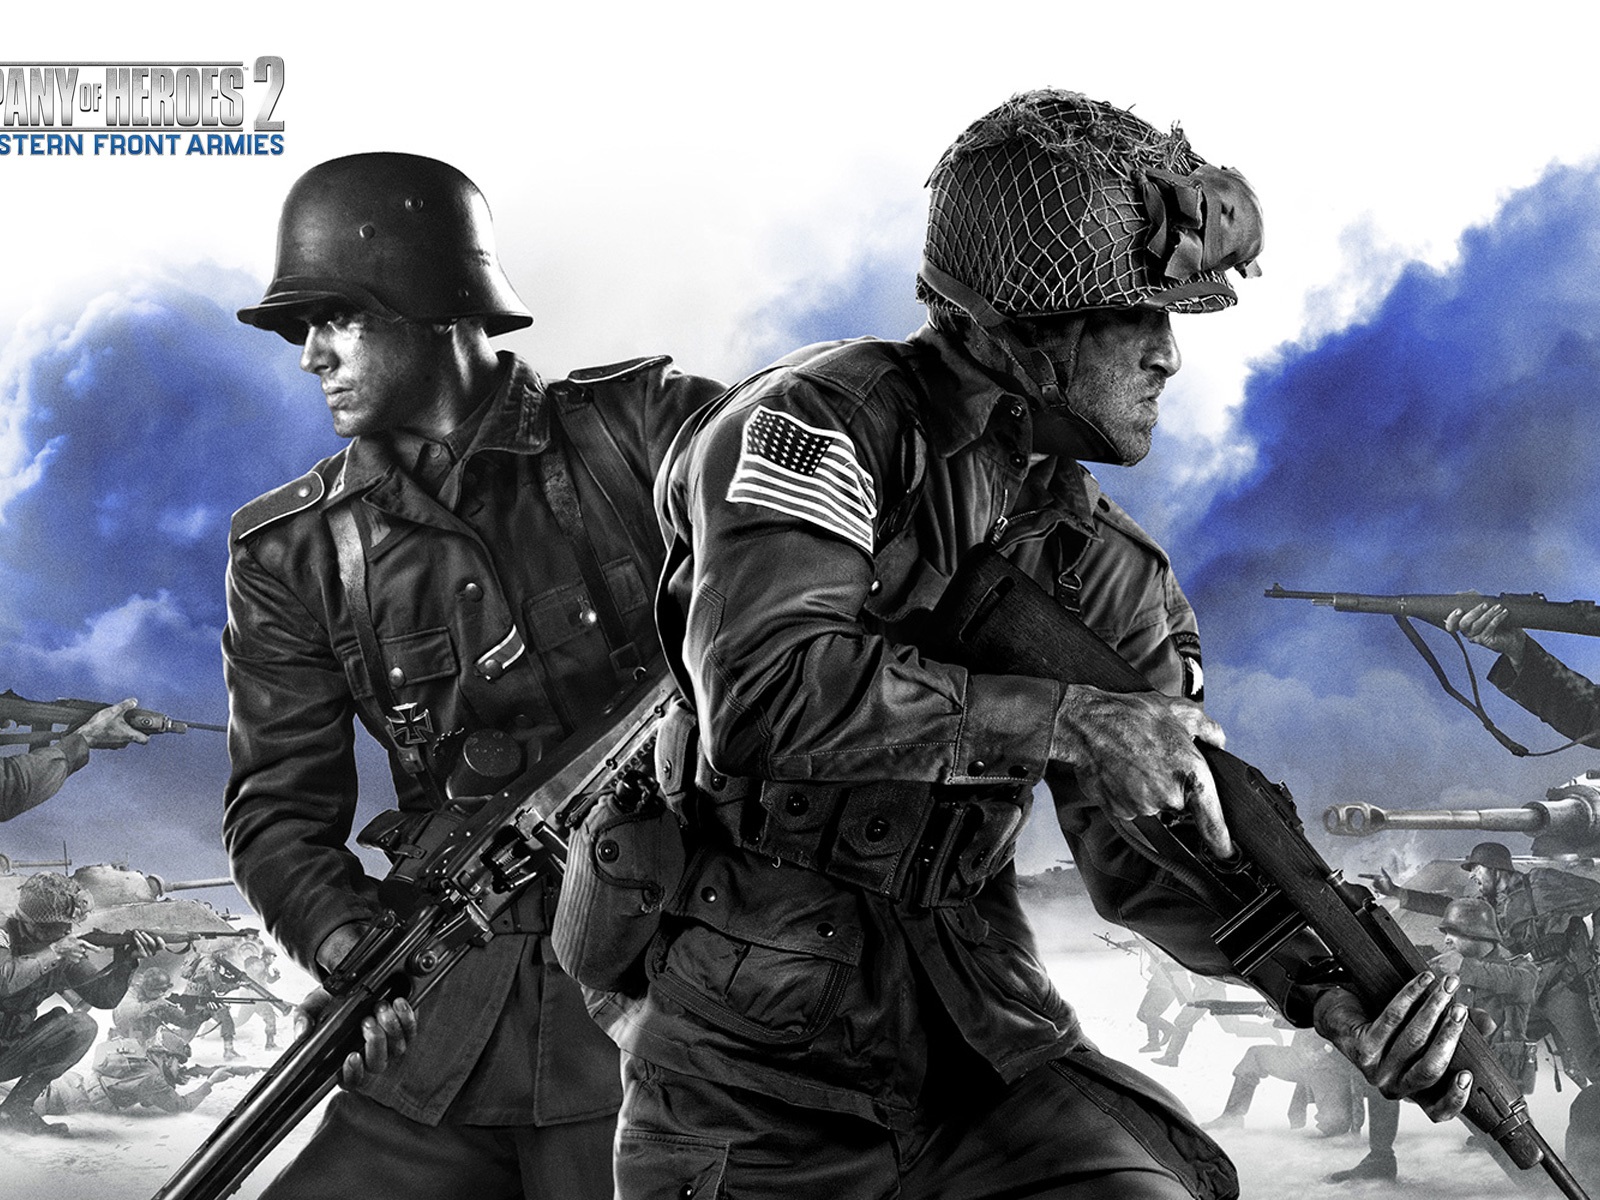 Hd Widescreen - Company Of Heroes 2 The Western Front Armies , HD Wallpaper & Backgrounds